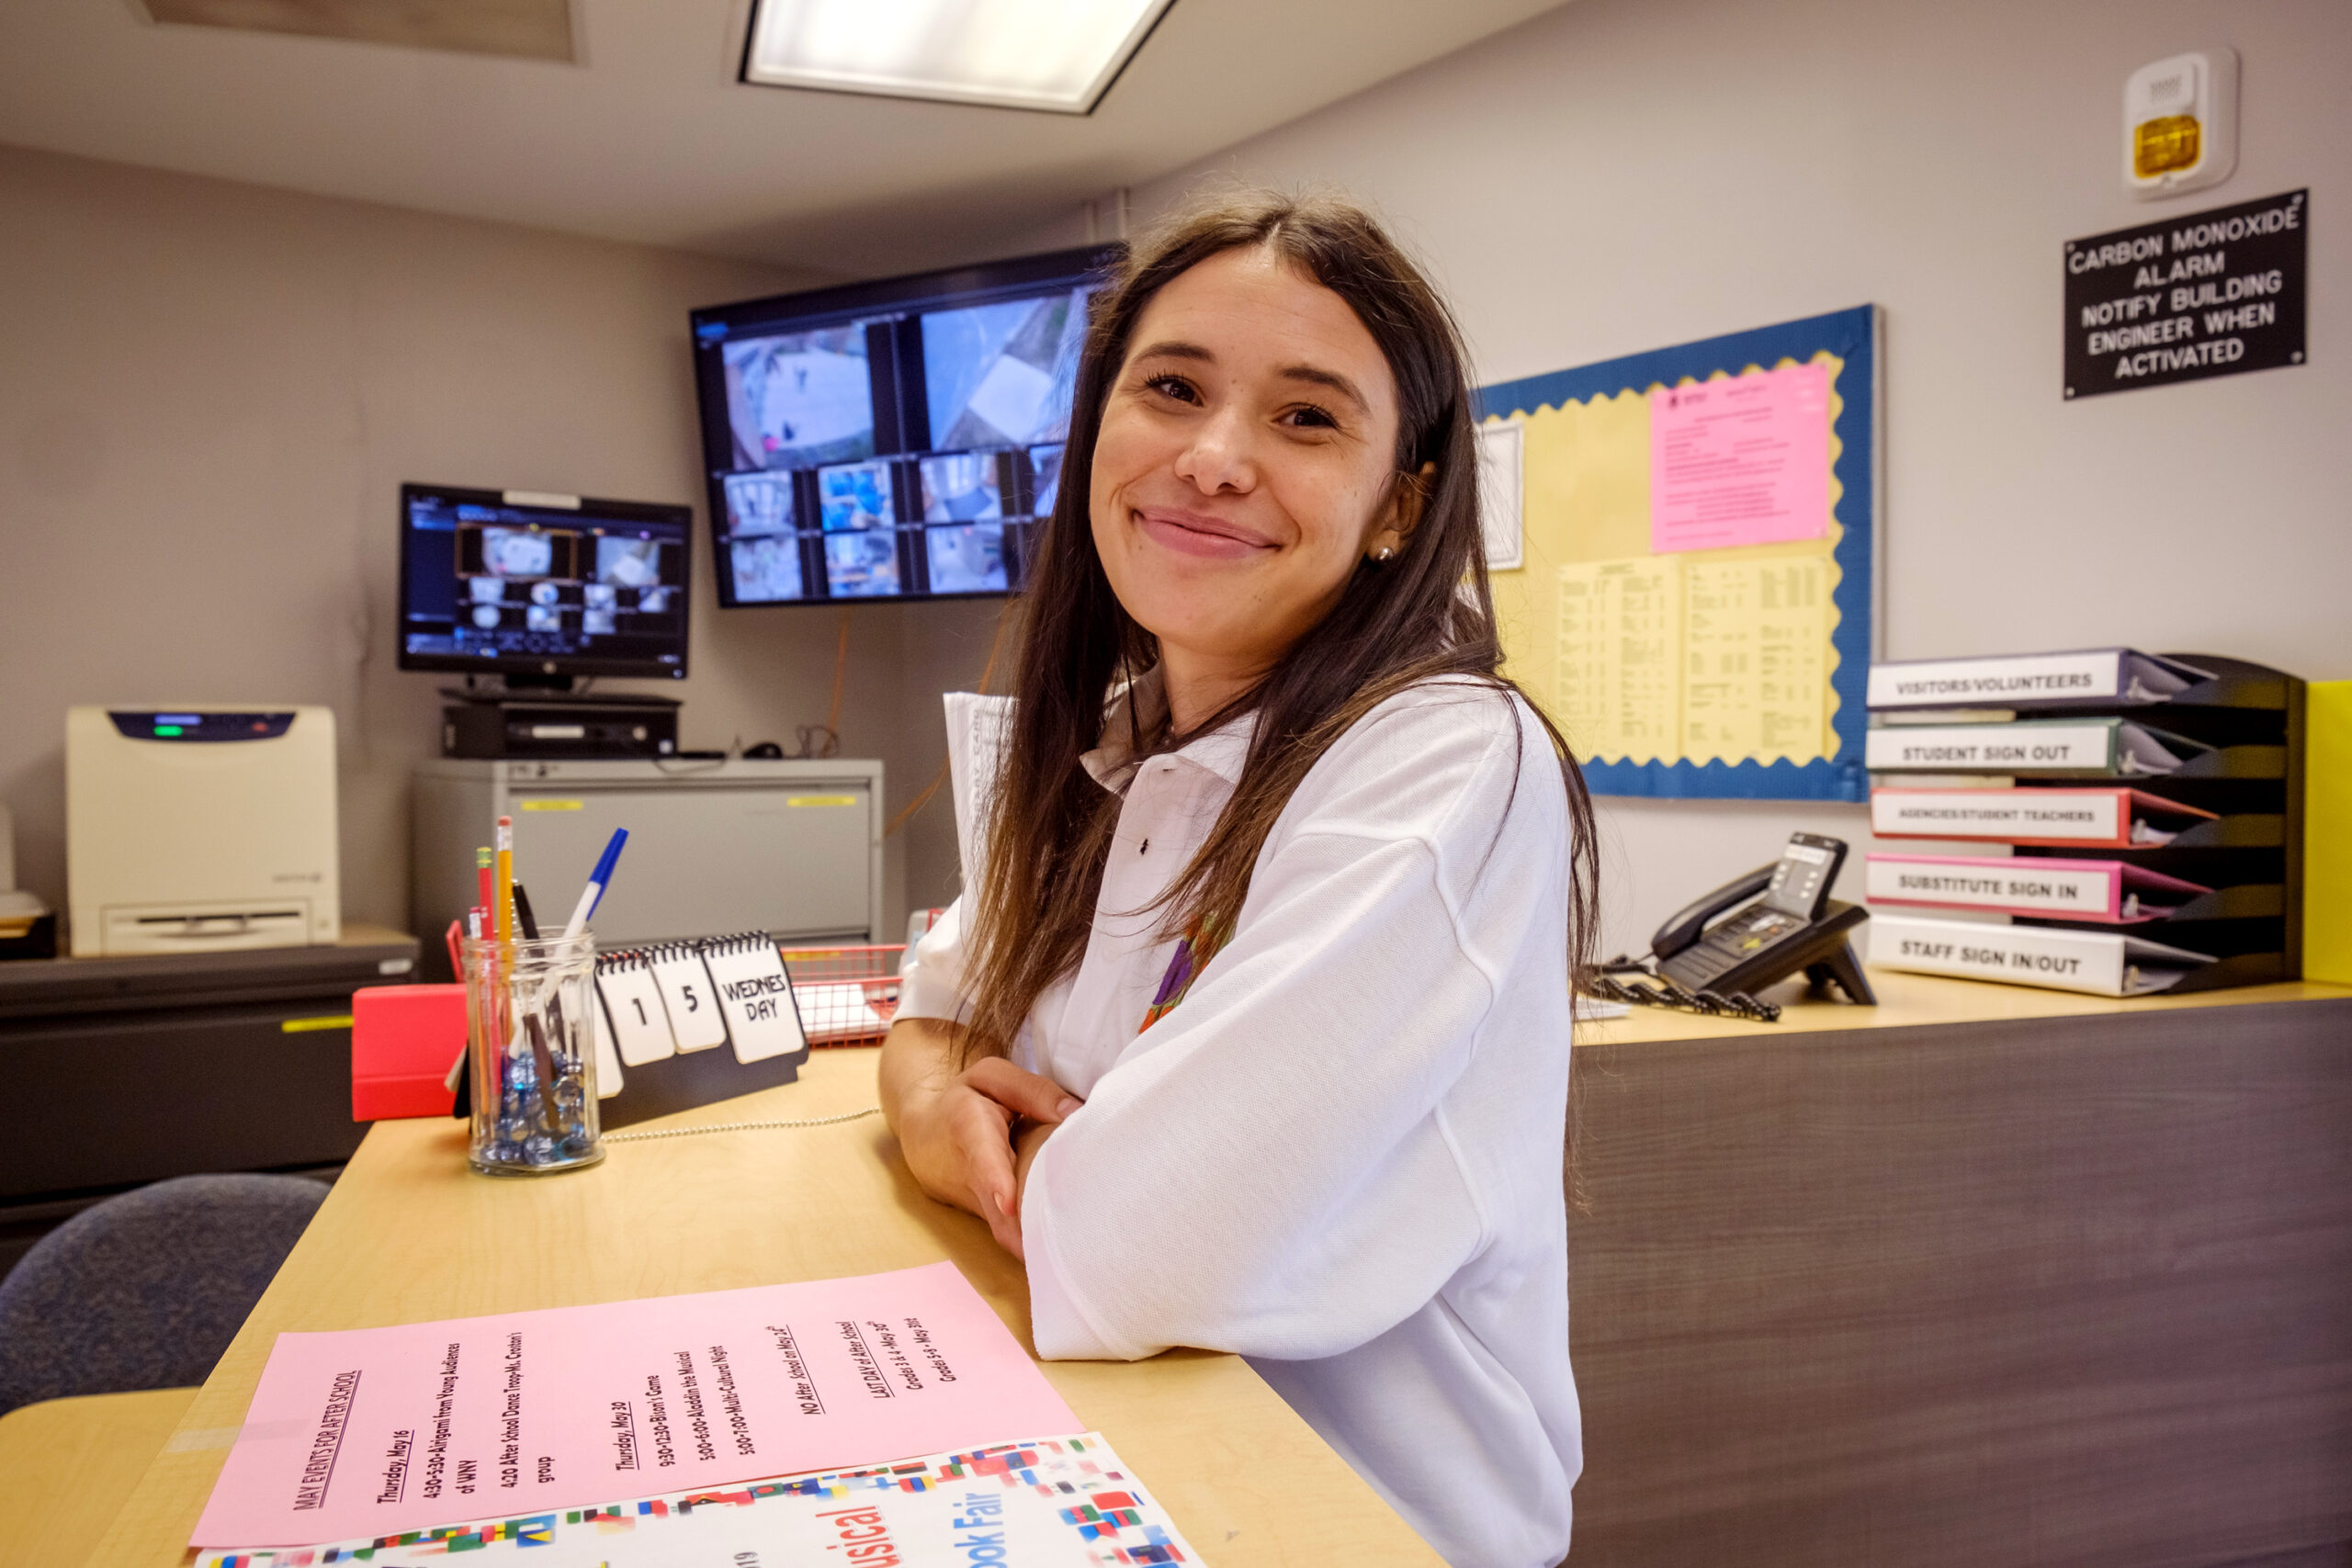 talia rodriguez standing at a reception desk smiling